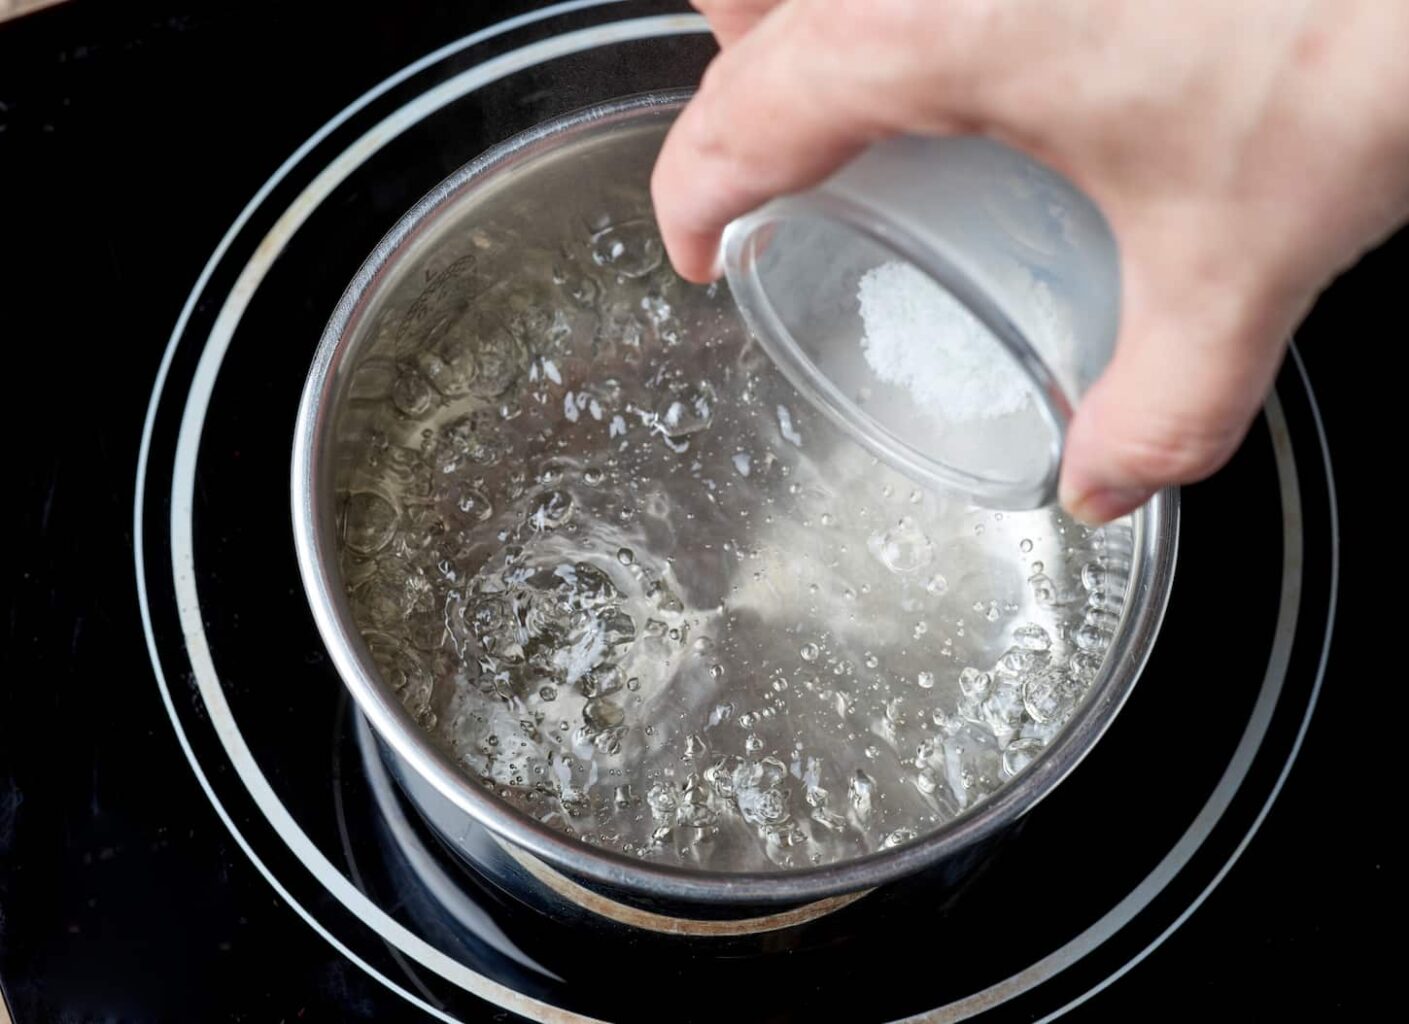 An image of a hand adding salt to a boiling water pot on an electric induction hob.